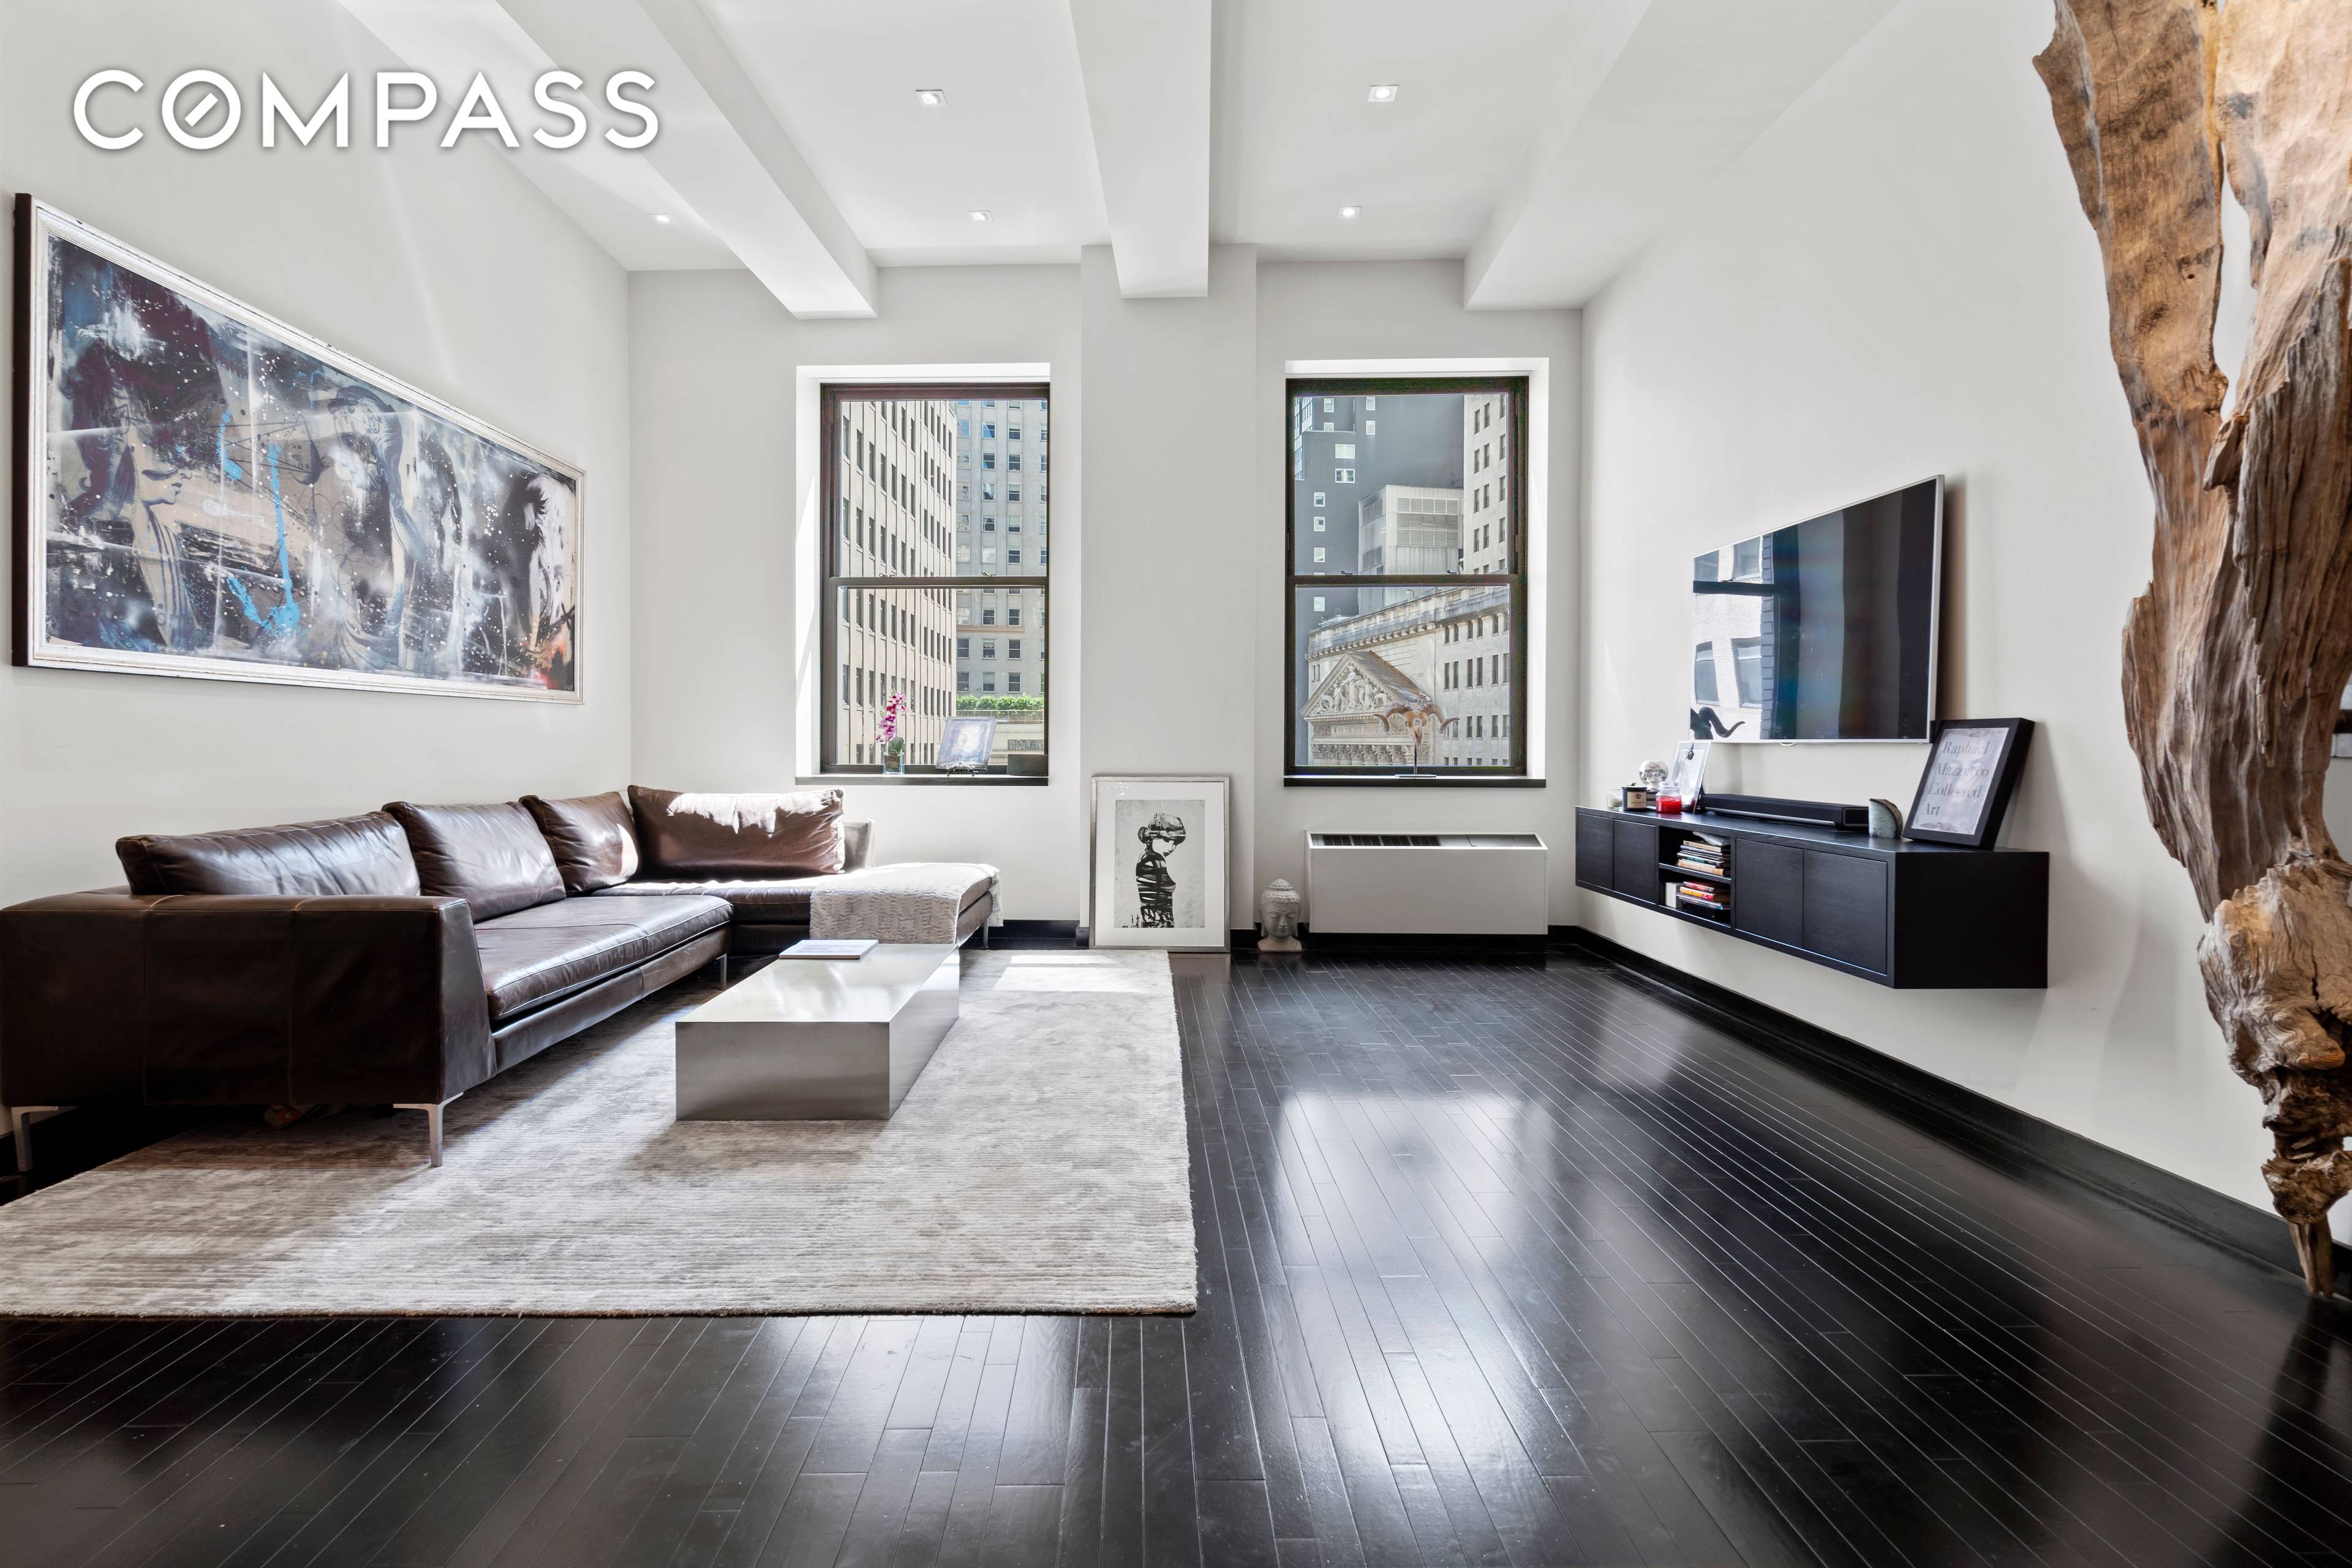 Welcome to this truly unique and breathtaking exquisite loft spanning 1, 070 square feet located at 20 Pine Street.